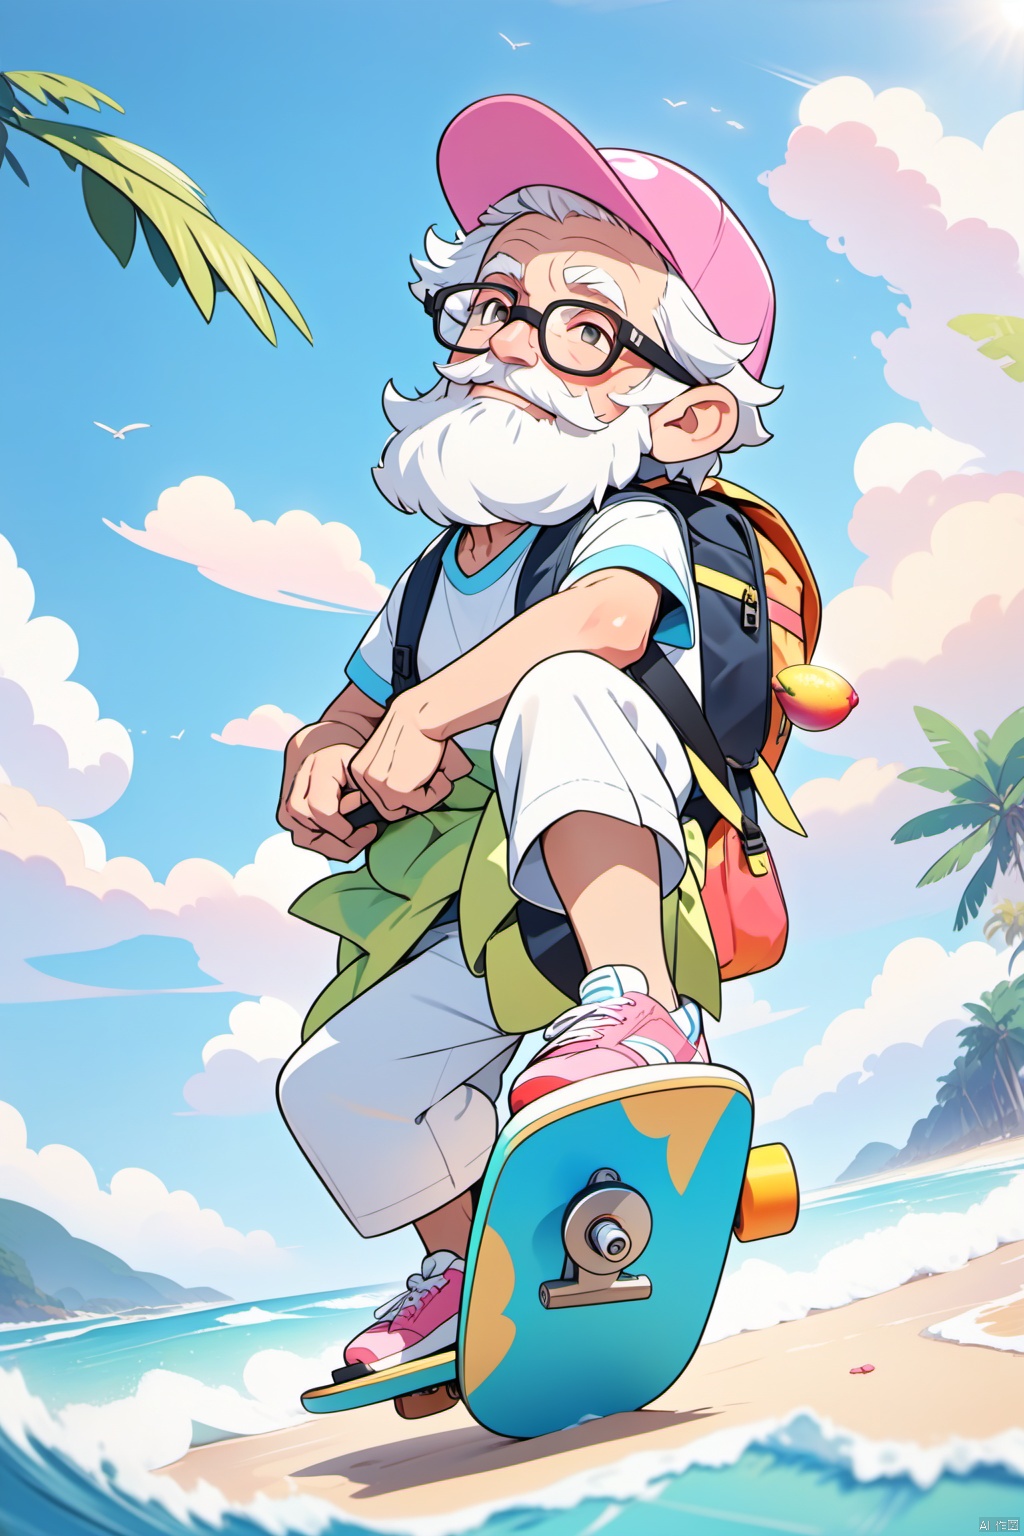 solo,(masterpiece),(best quality),The image showcases a vibrant 3D animated character,an elderly man with a white beard,wearing a pink cap,glasses,and a backpack. He's posed next to a colorful skateboard,exuding a relaxed and adventurous vibe,in summer,day,sky,sea,beach,on the beach,waves,cirrus,coconut tree,holding_mango,